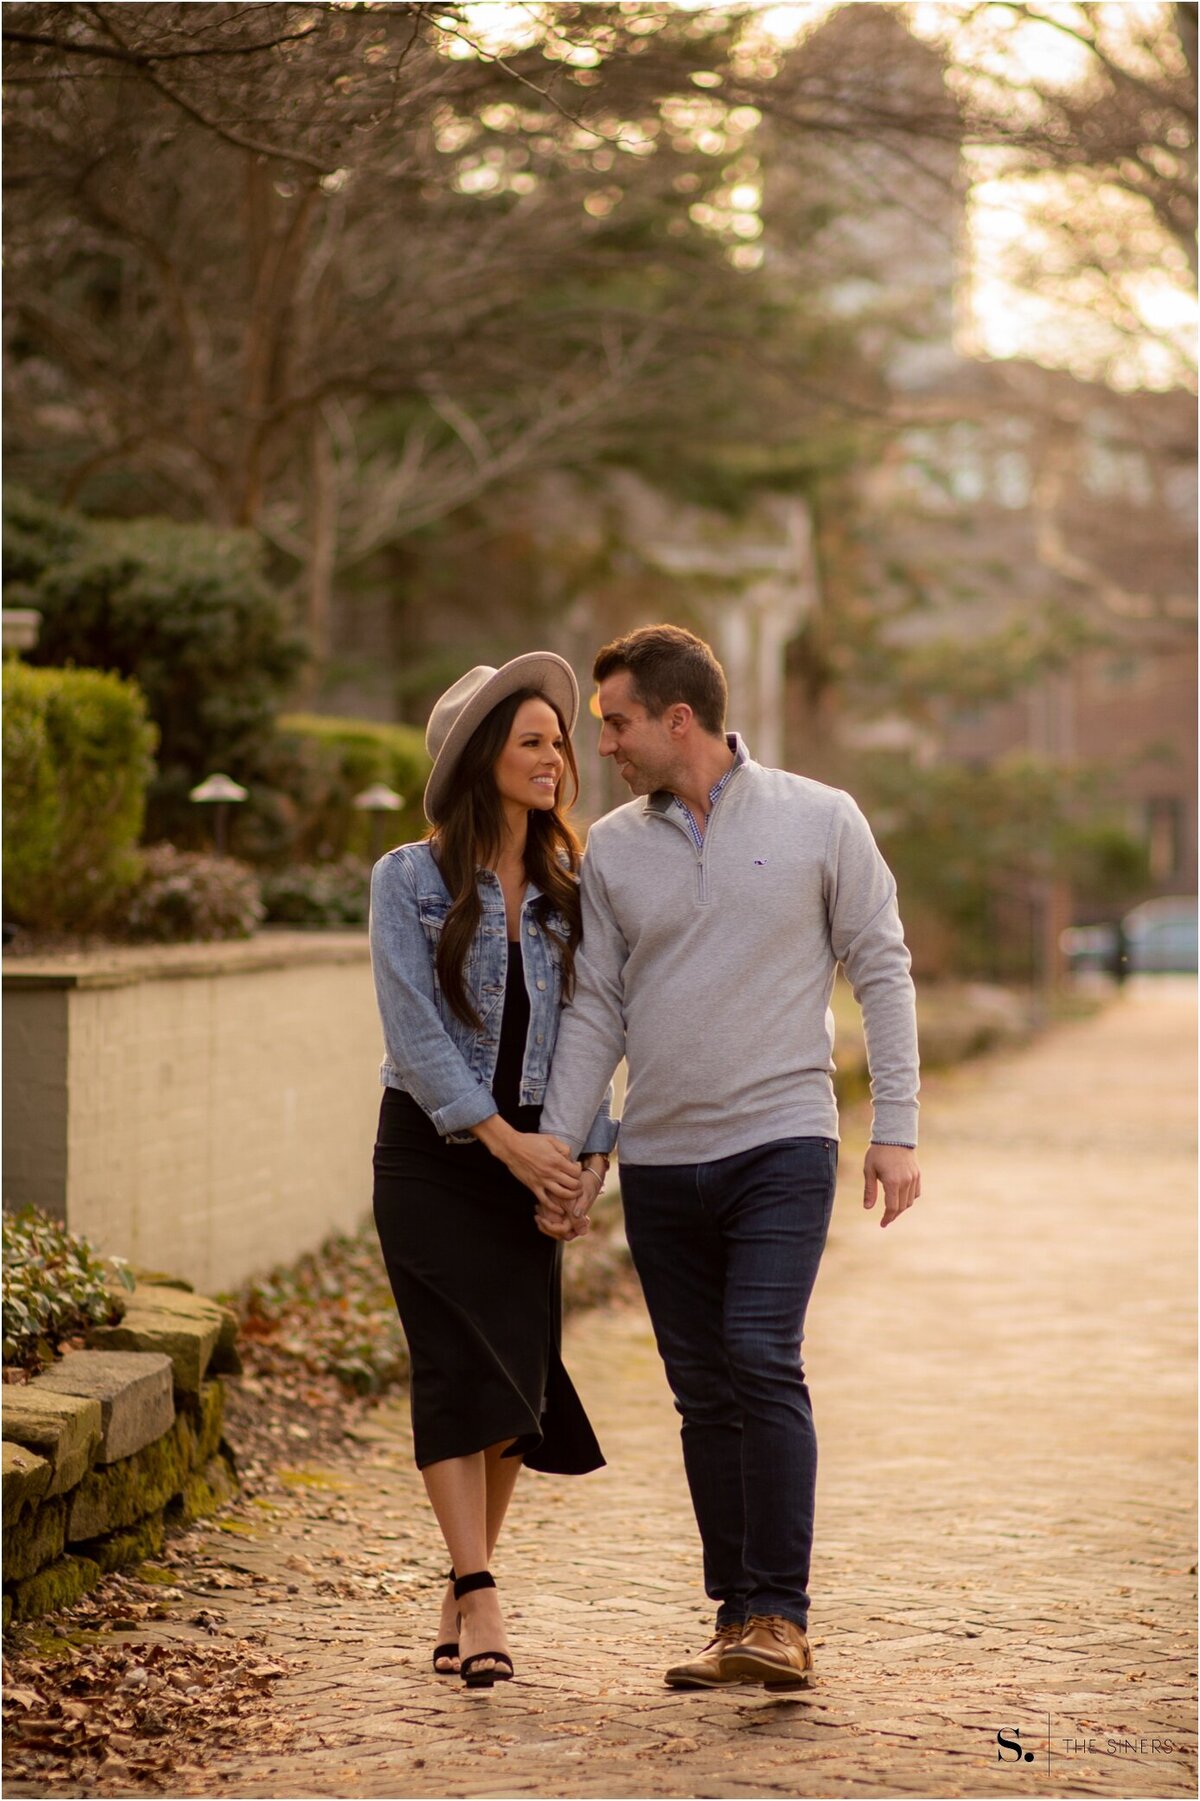 Siners Photography | Indianapolis Wedding Photographer | Downtown Indy Engagement | Event + Portrait Photography | Destination Photographer_0015